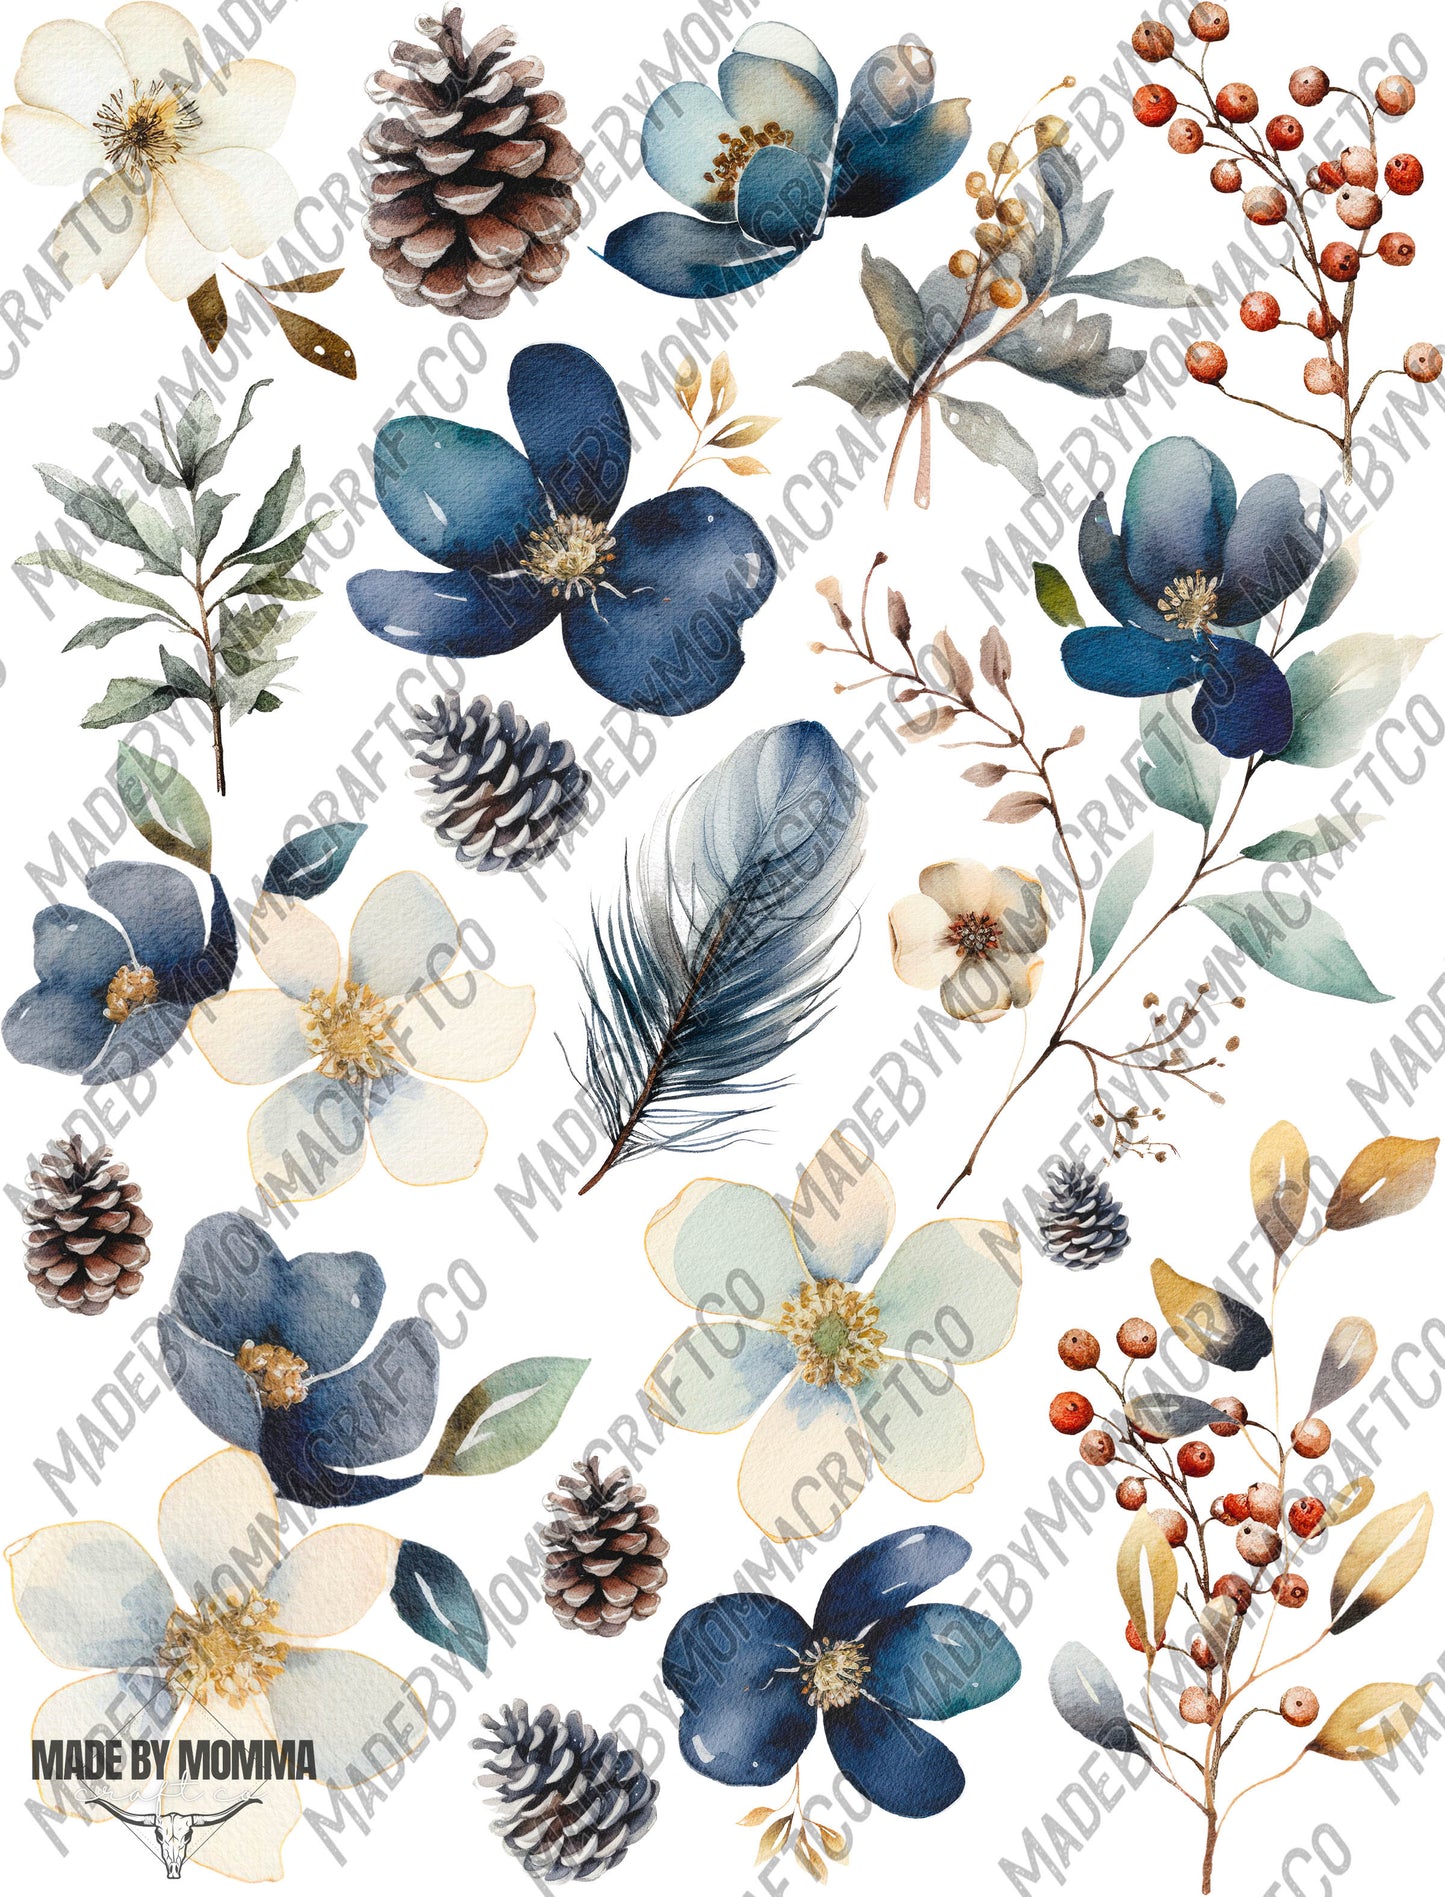 Indigo and White Florals - Cheat Clear Waterslide ™ or Sticker Themed Sheet  Elements Sheet